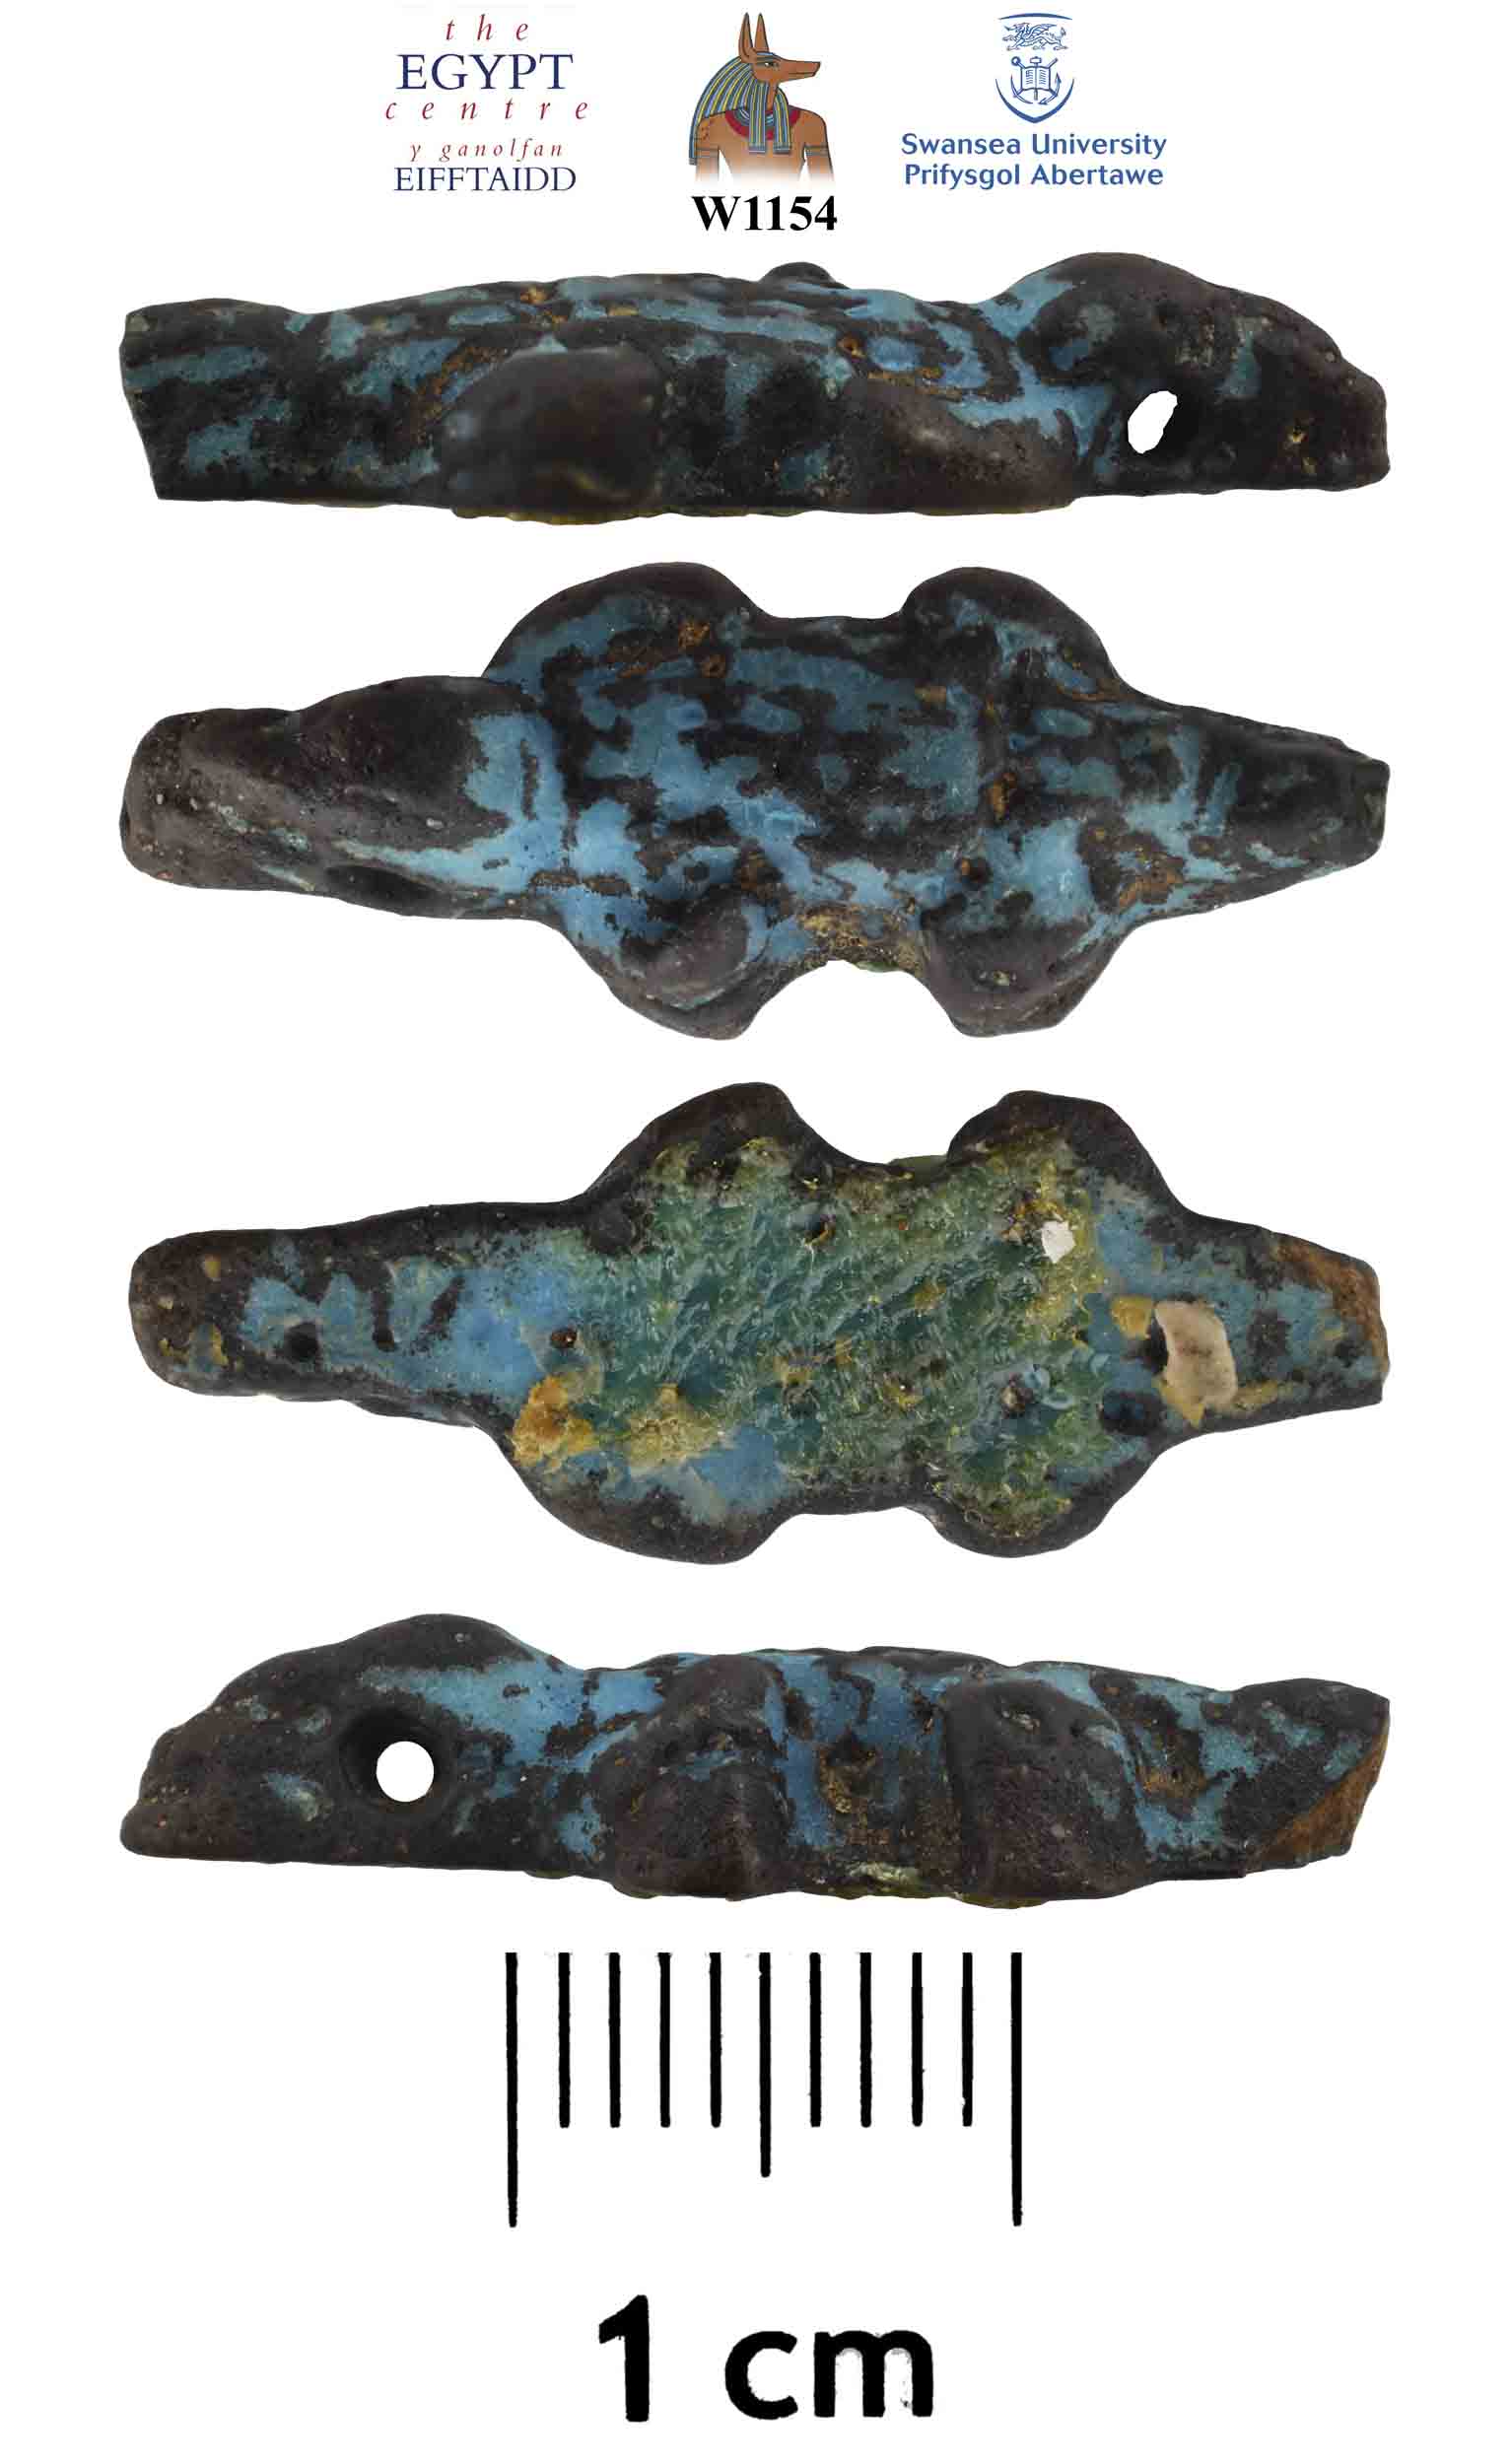 Image for: Amulet of a crocodile